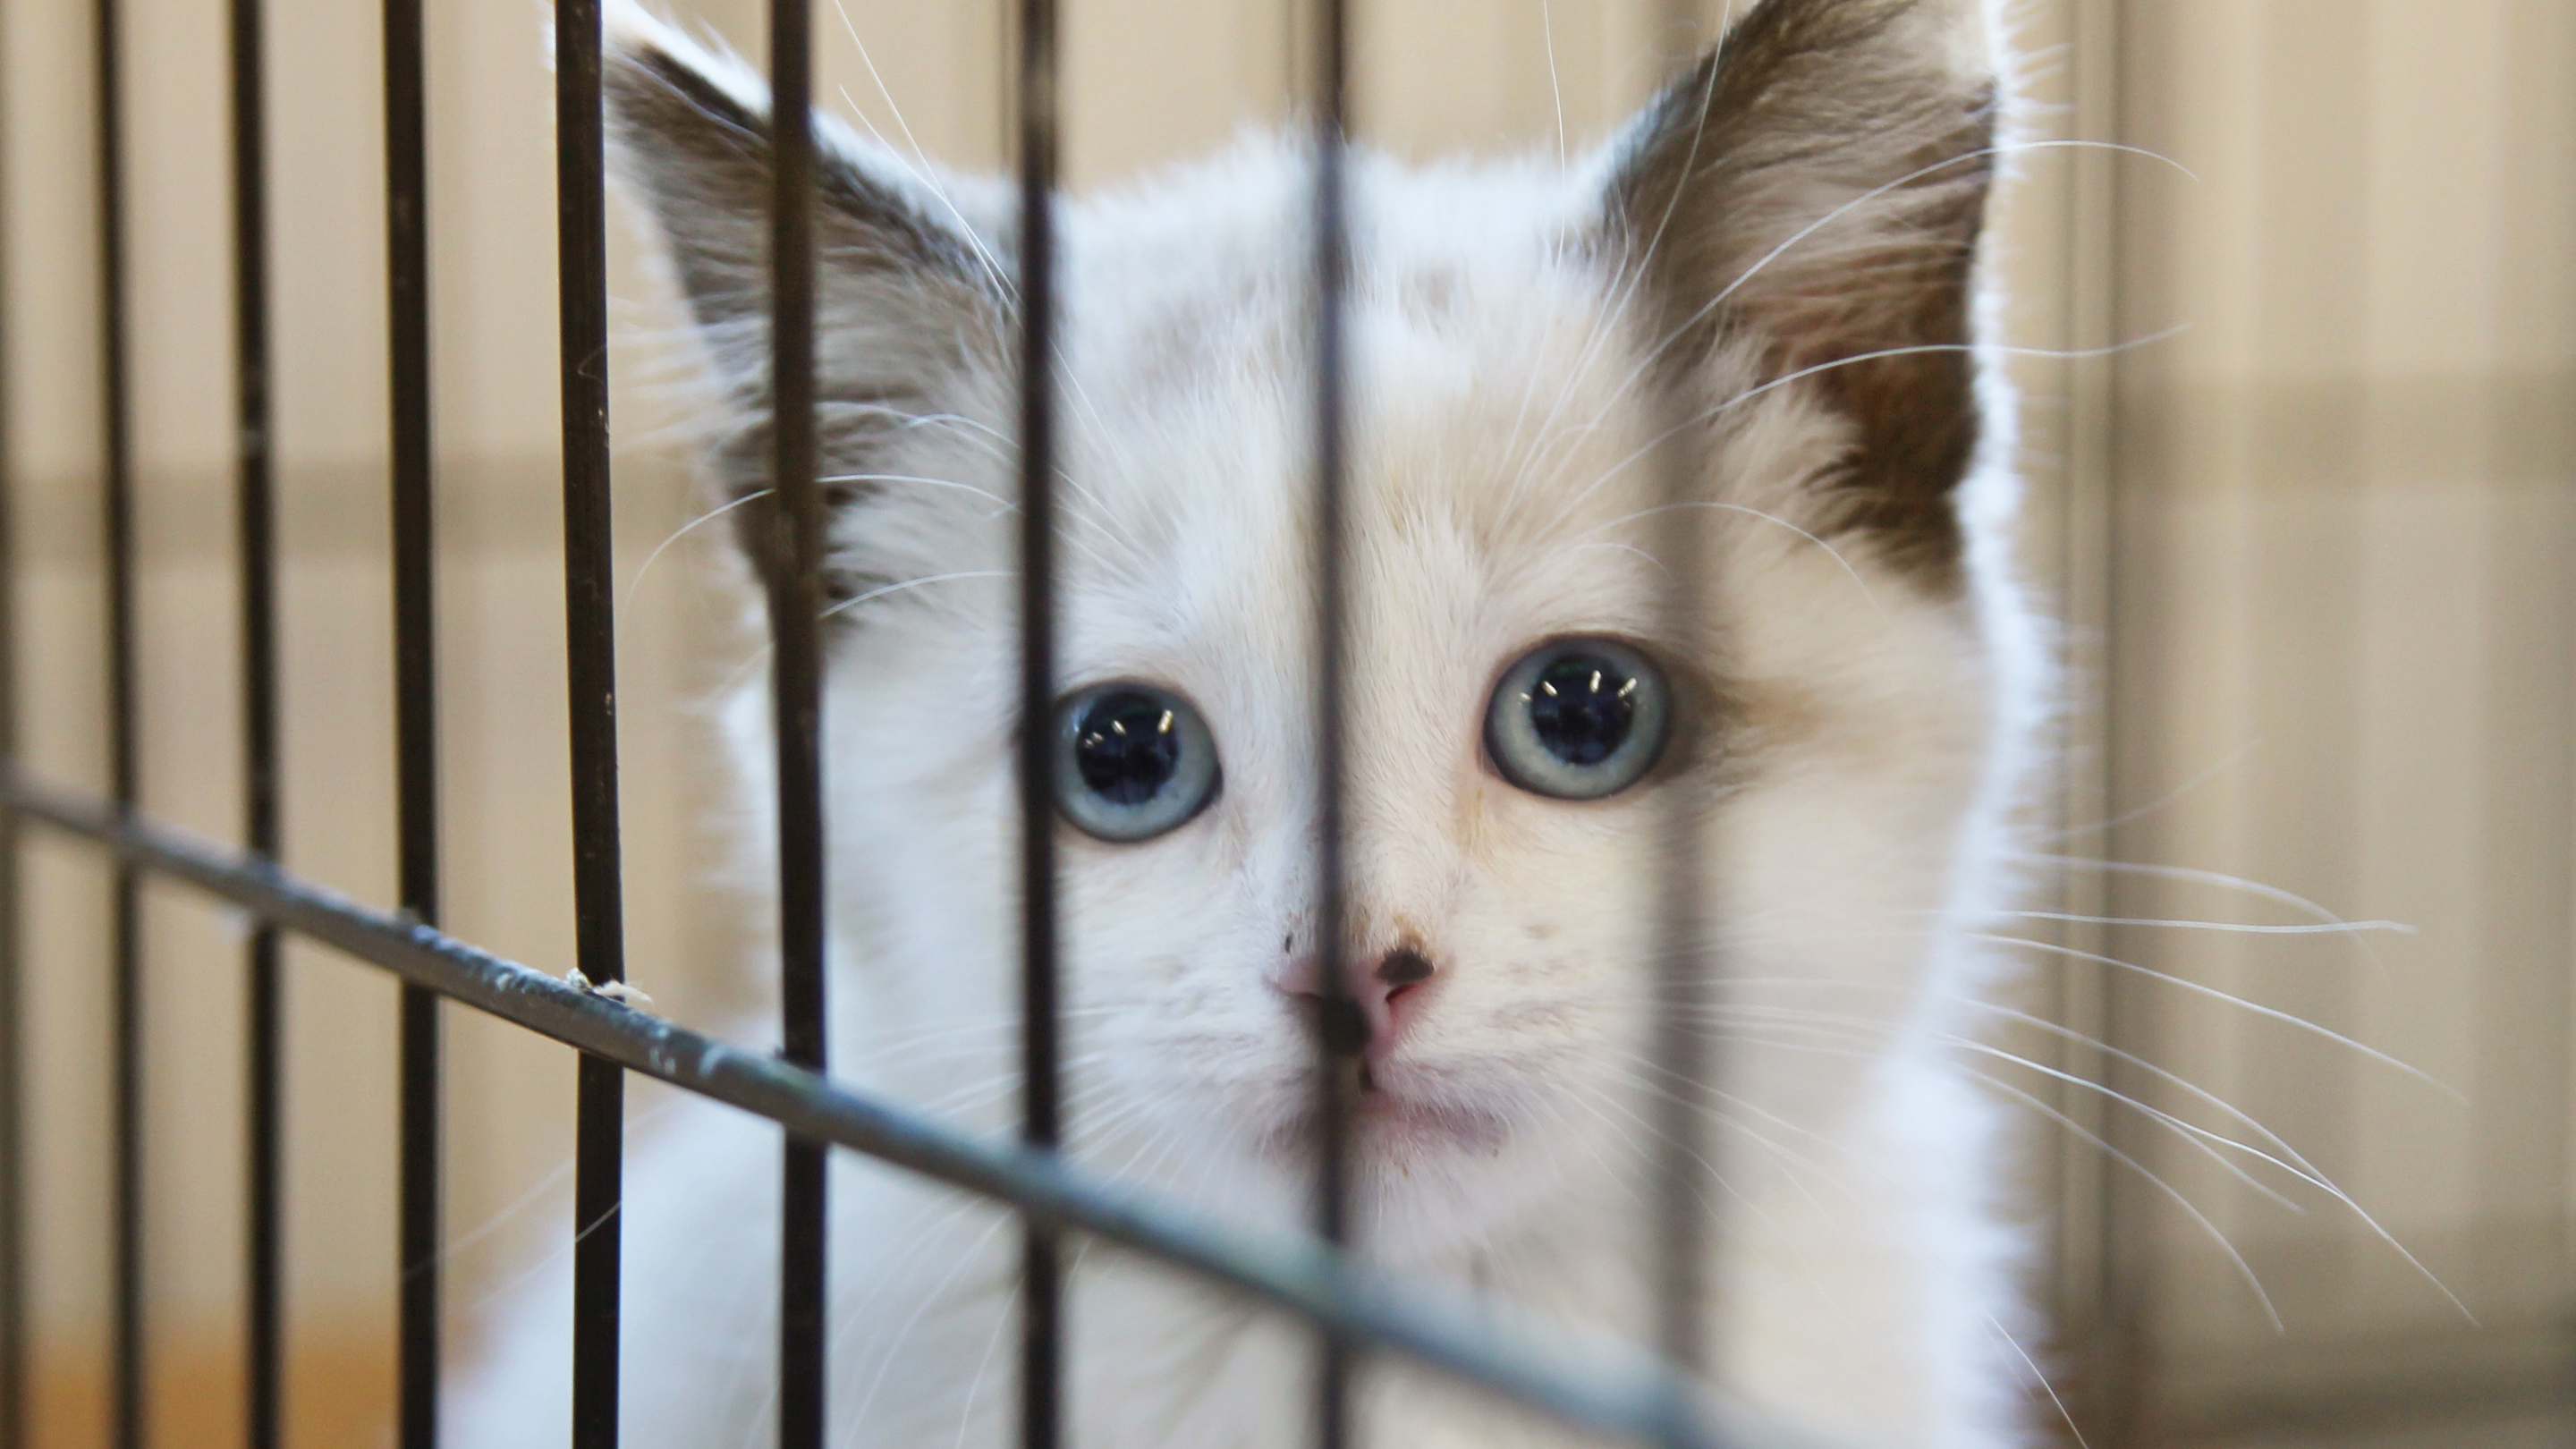 A small white cat peers through cage bars